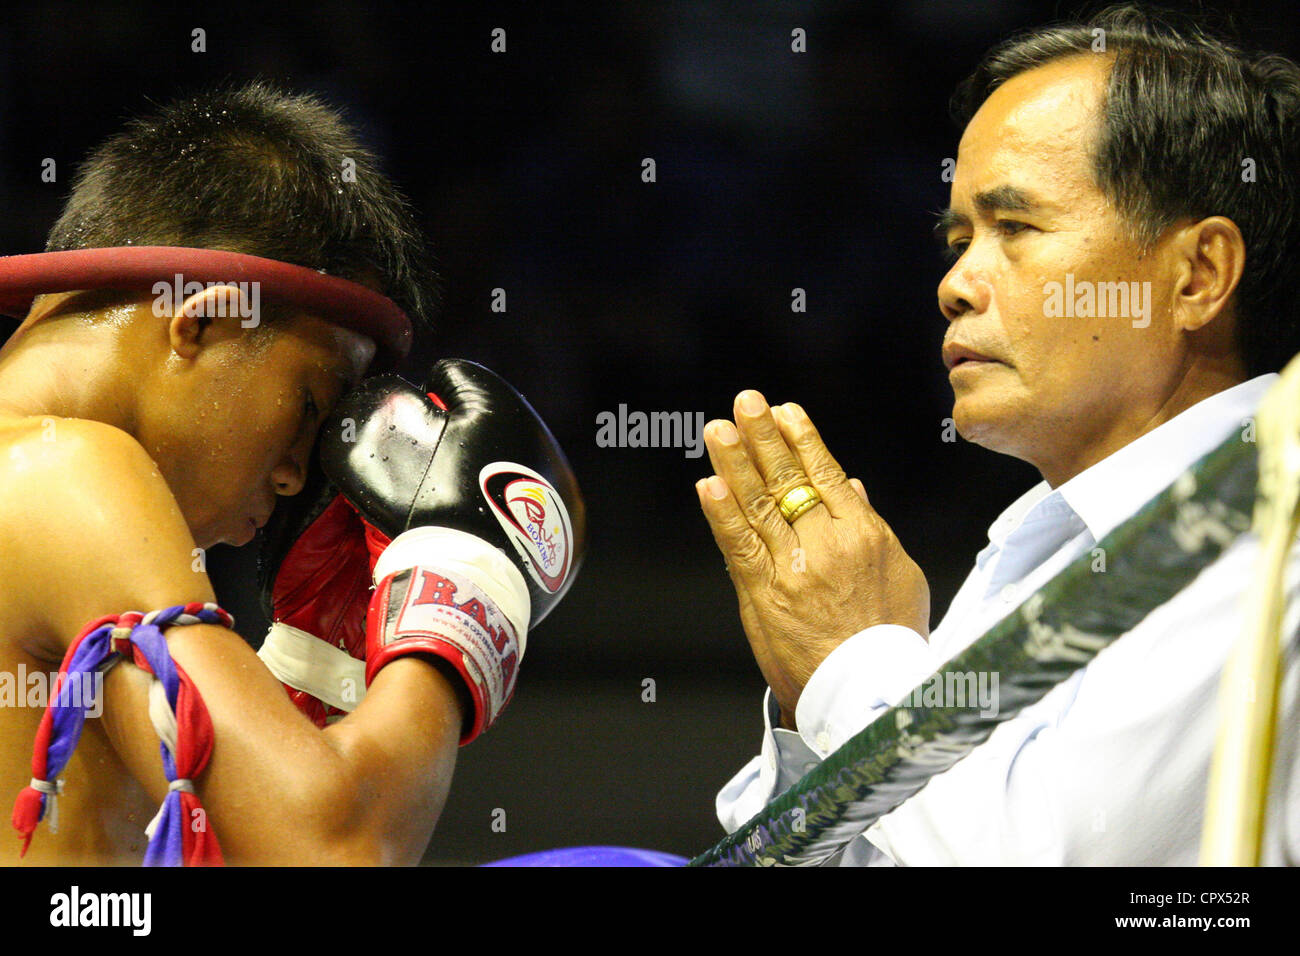 A boxer in preparation for a fight at the Rajadamern Muay Thai Stadium in Bangkok, Thailand. Stock Photo